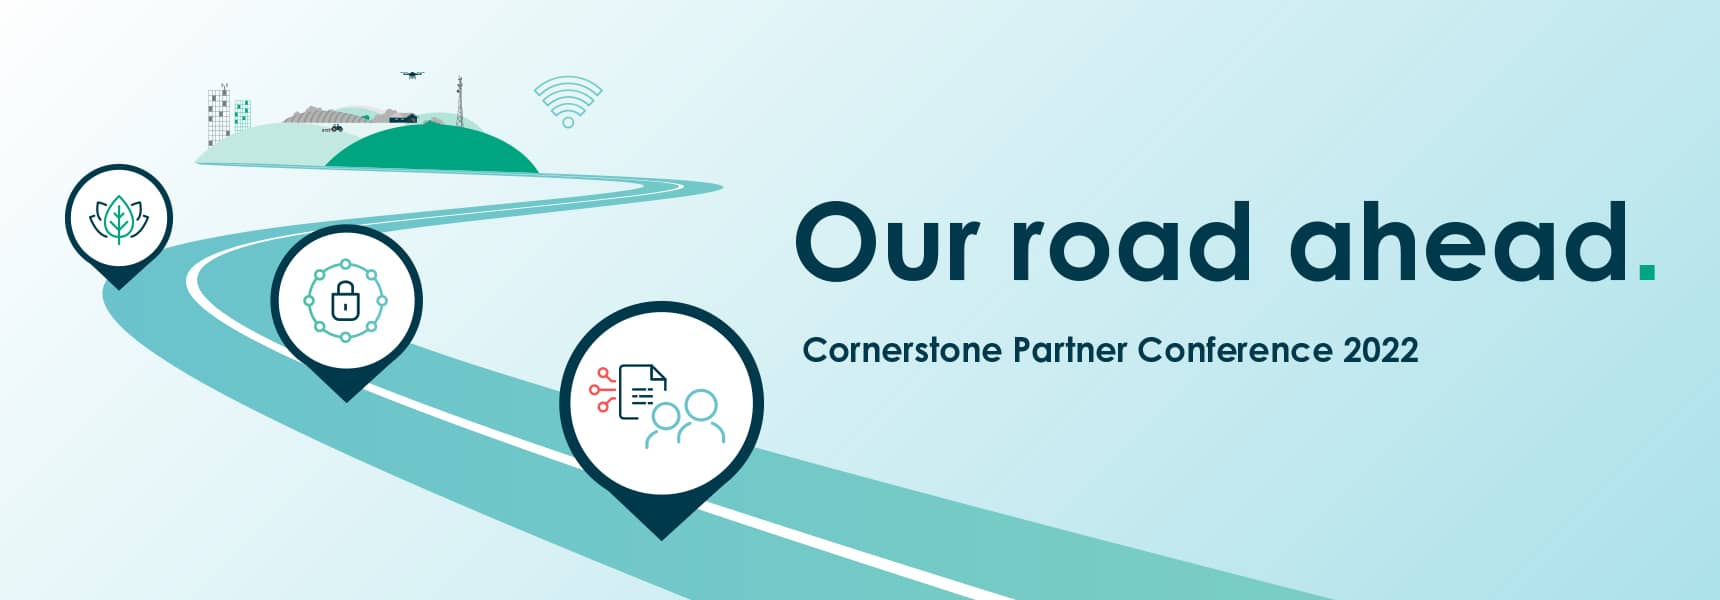 Our road ahead - Cornerstone Partner Conference